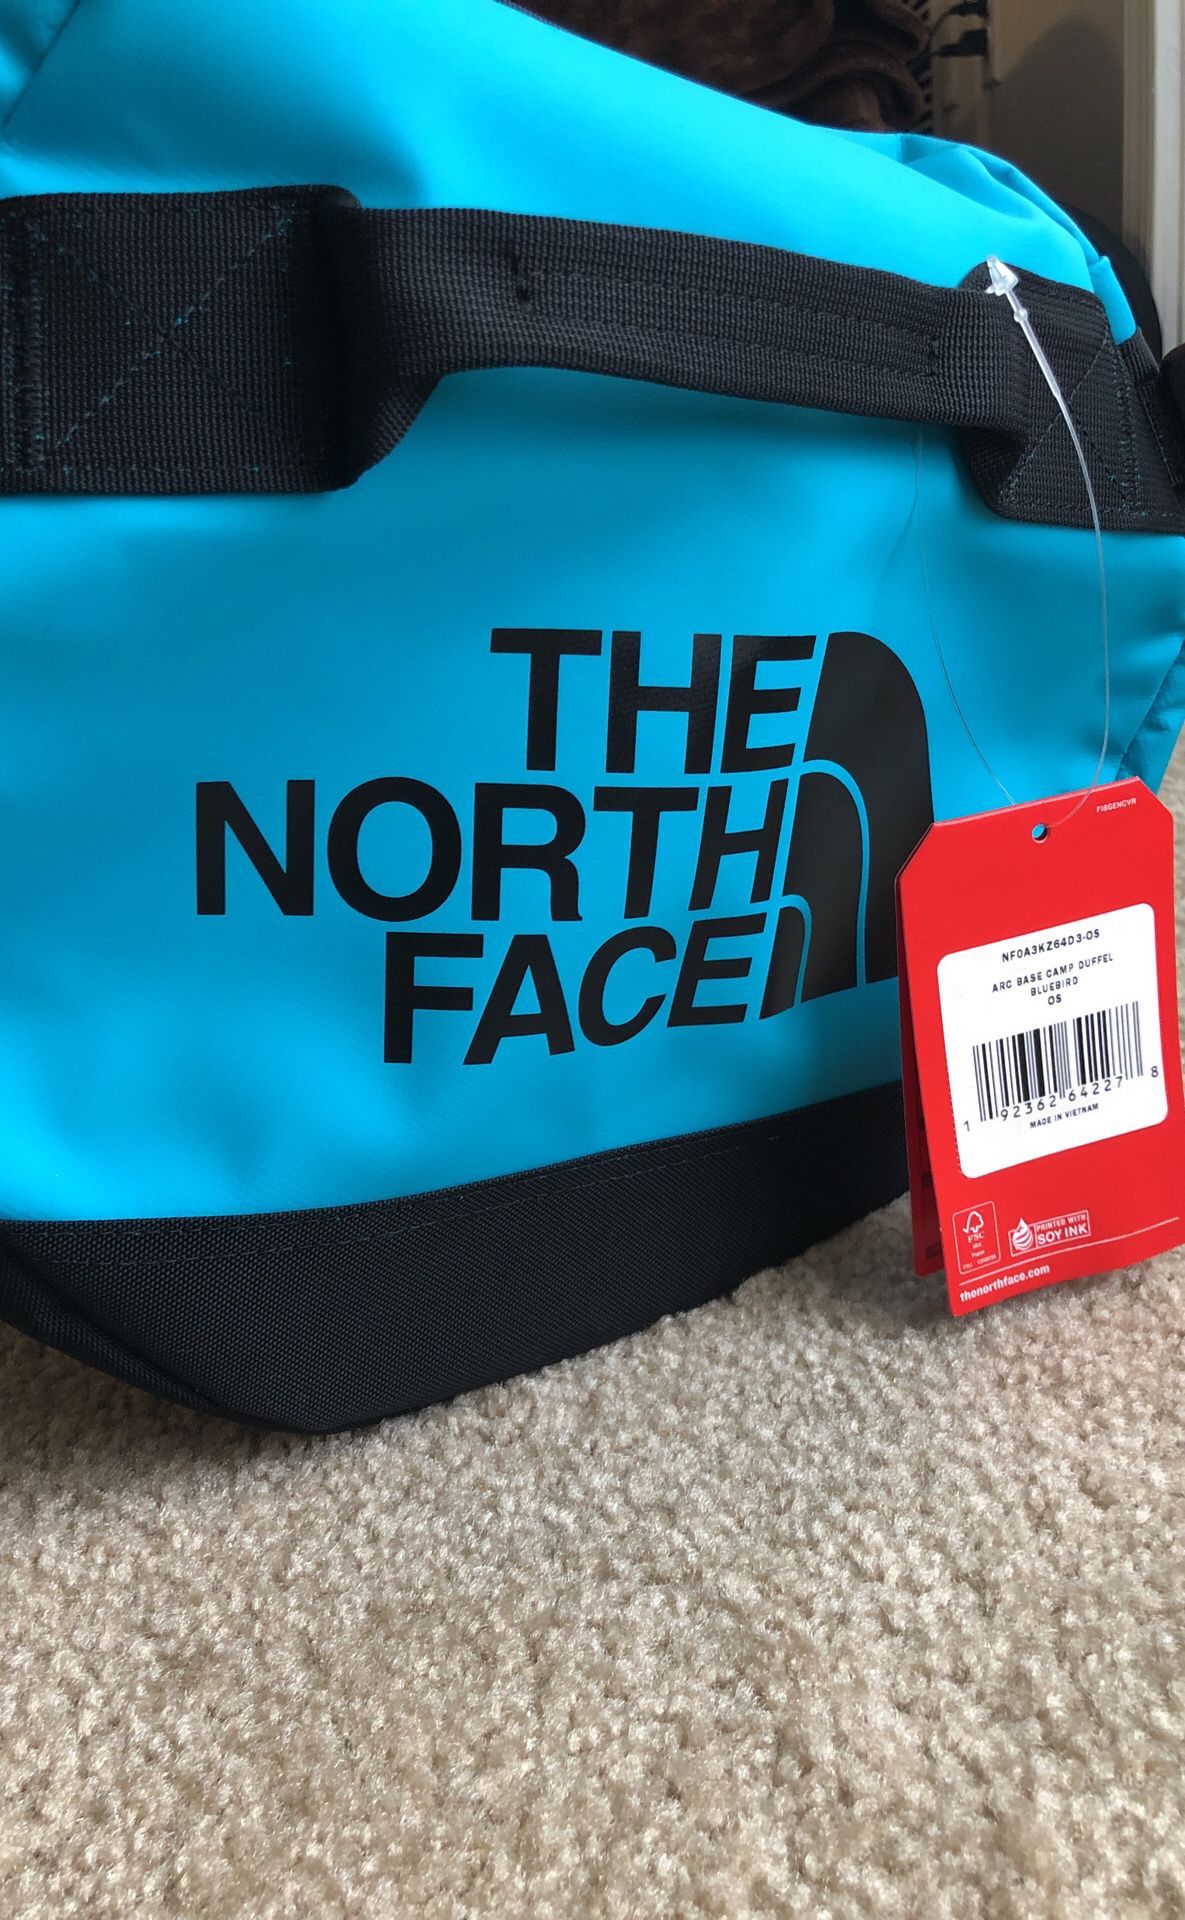 Supreme x The North Face duffle bag